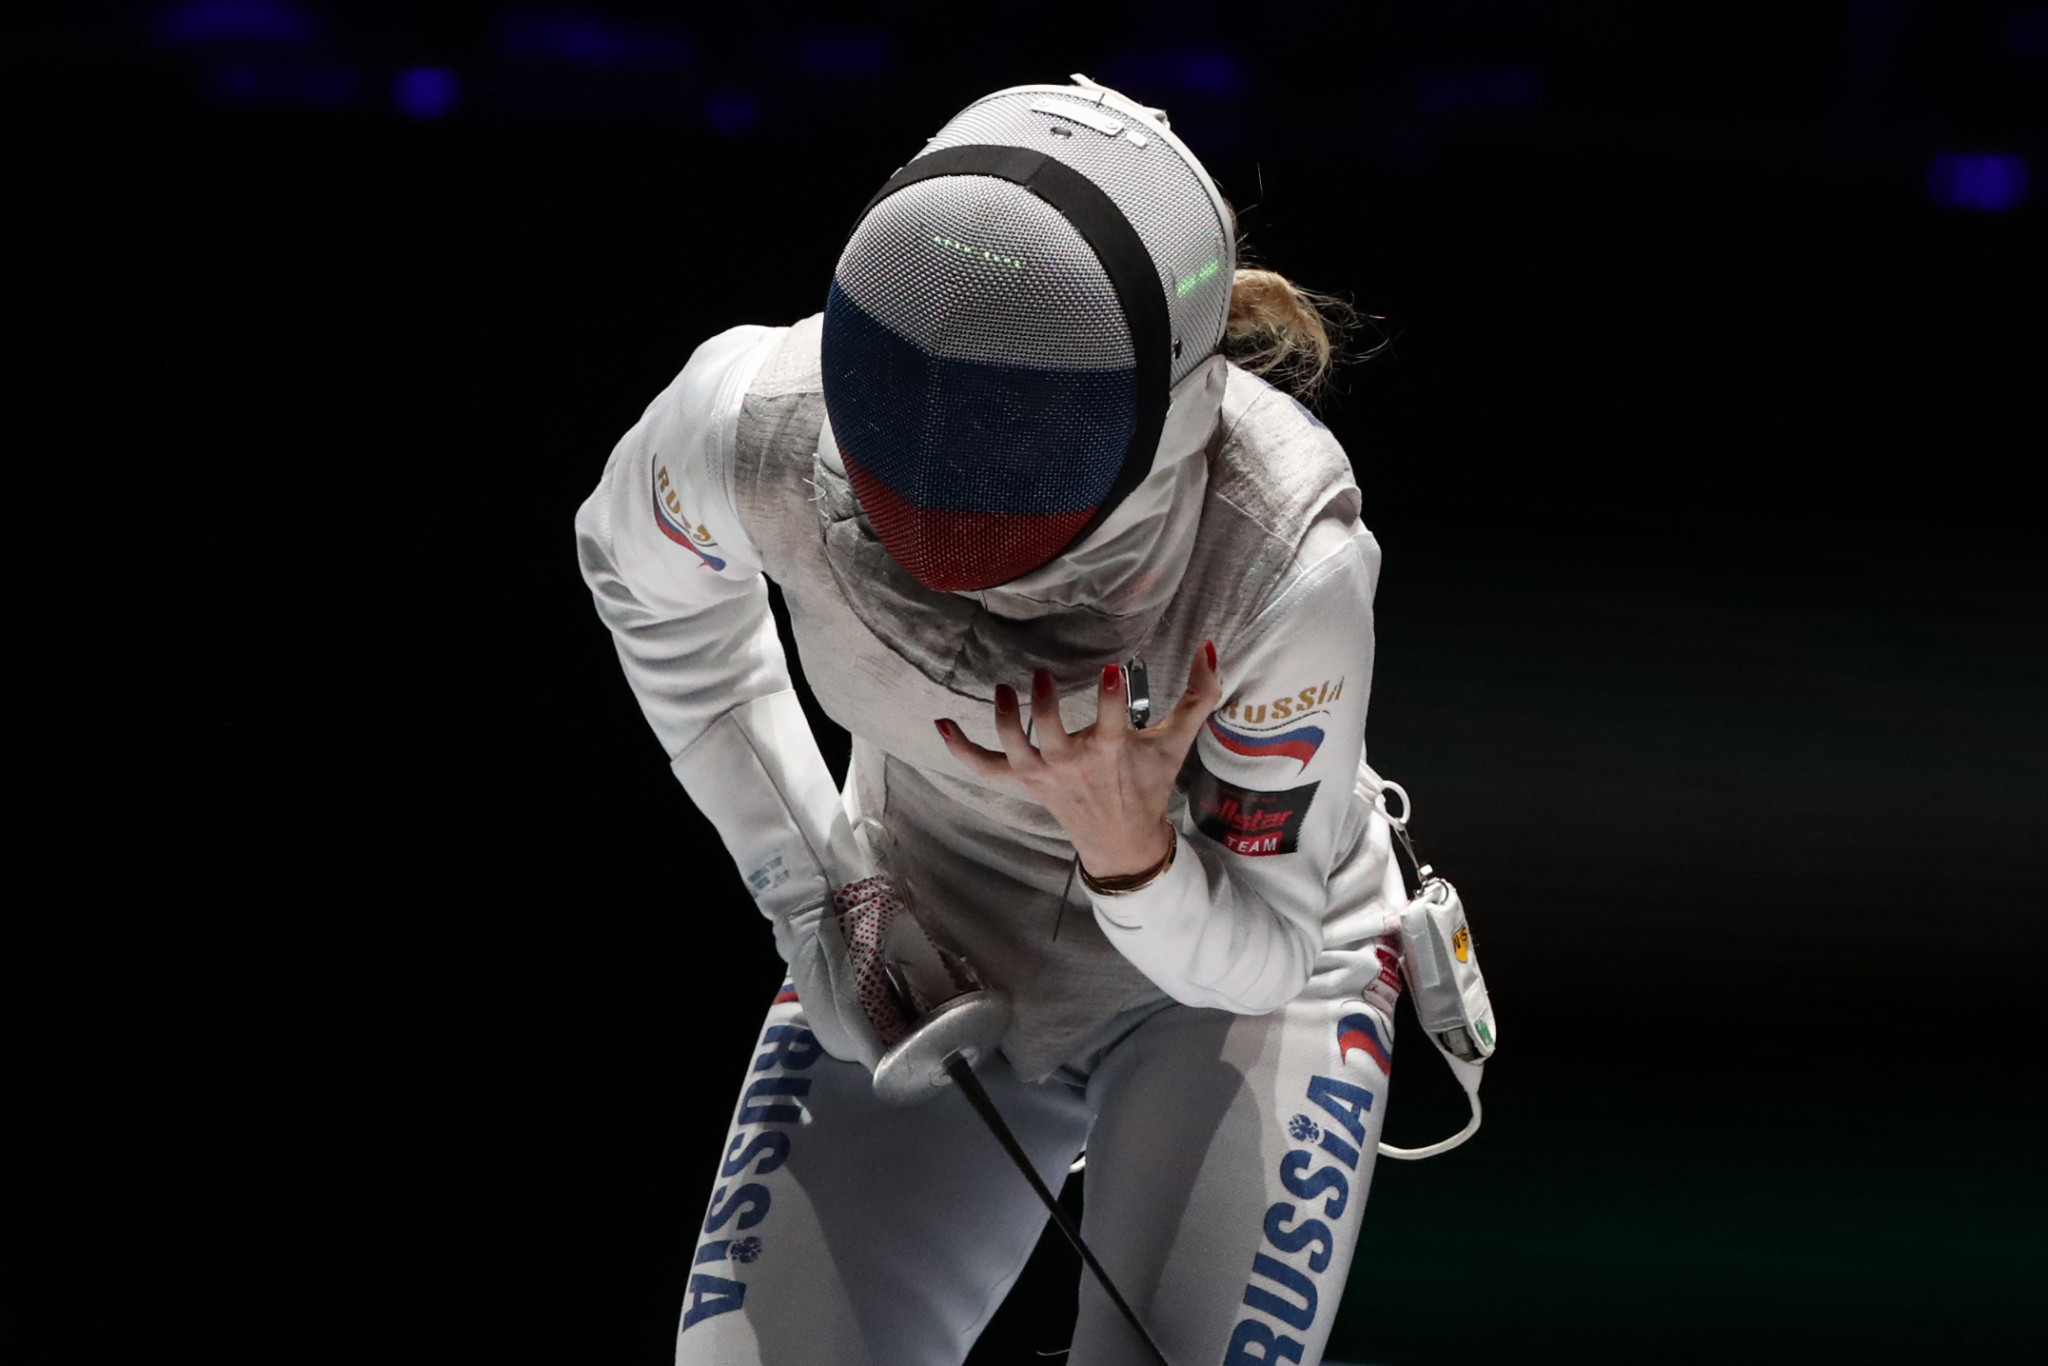 Strong fields heading to FIE Foil World Cups in Kazan and Cairo